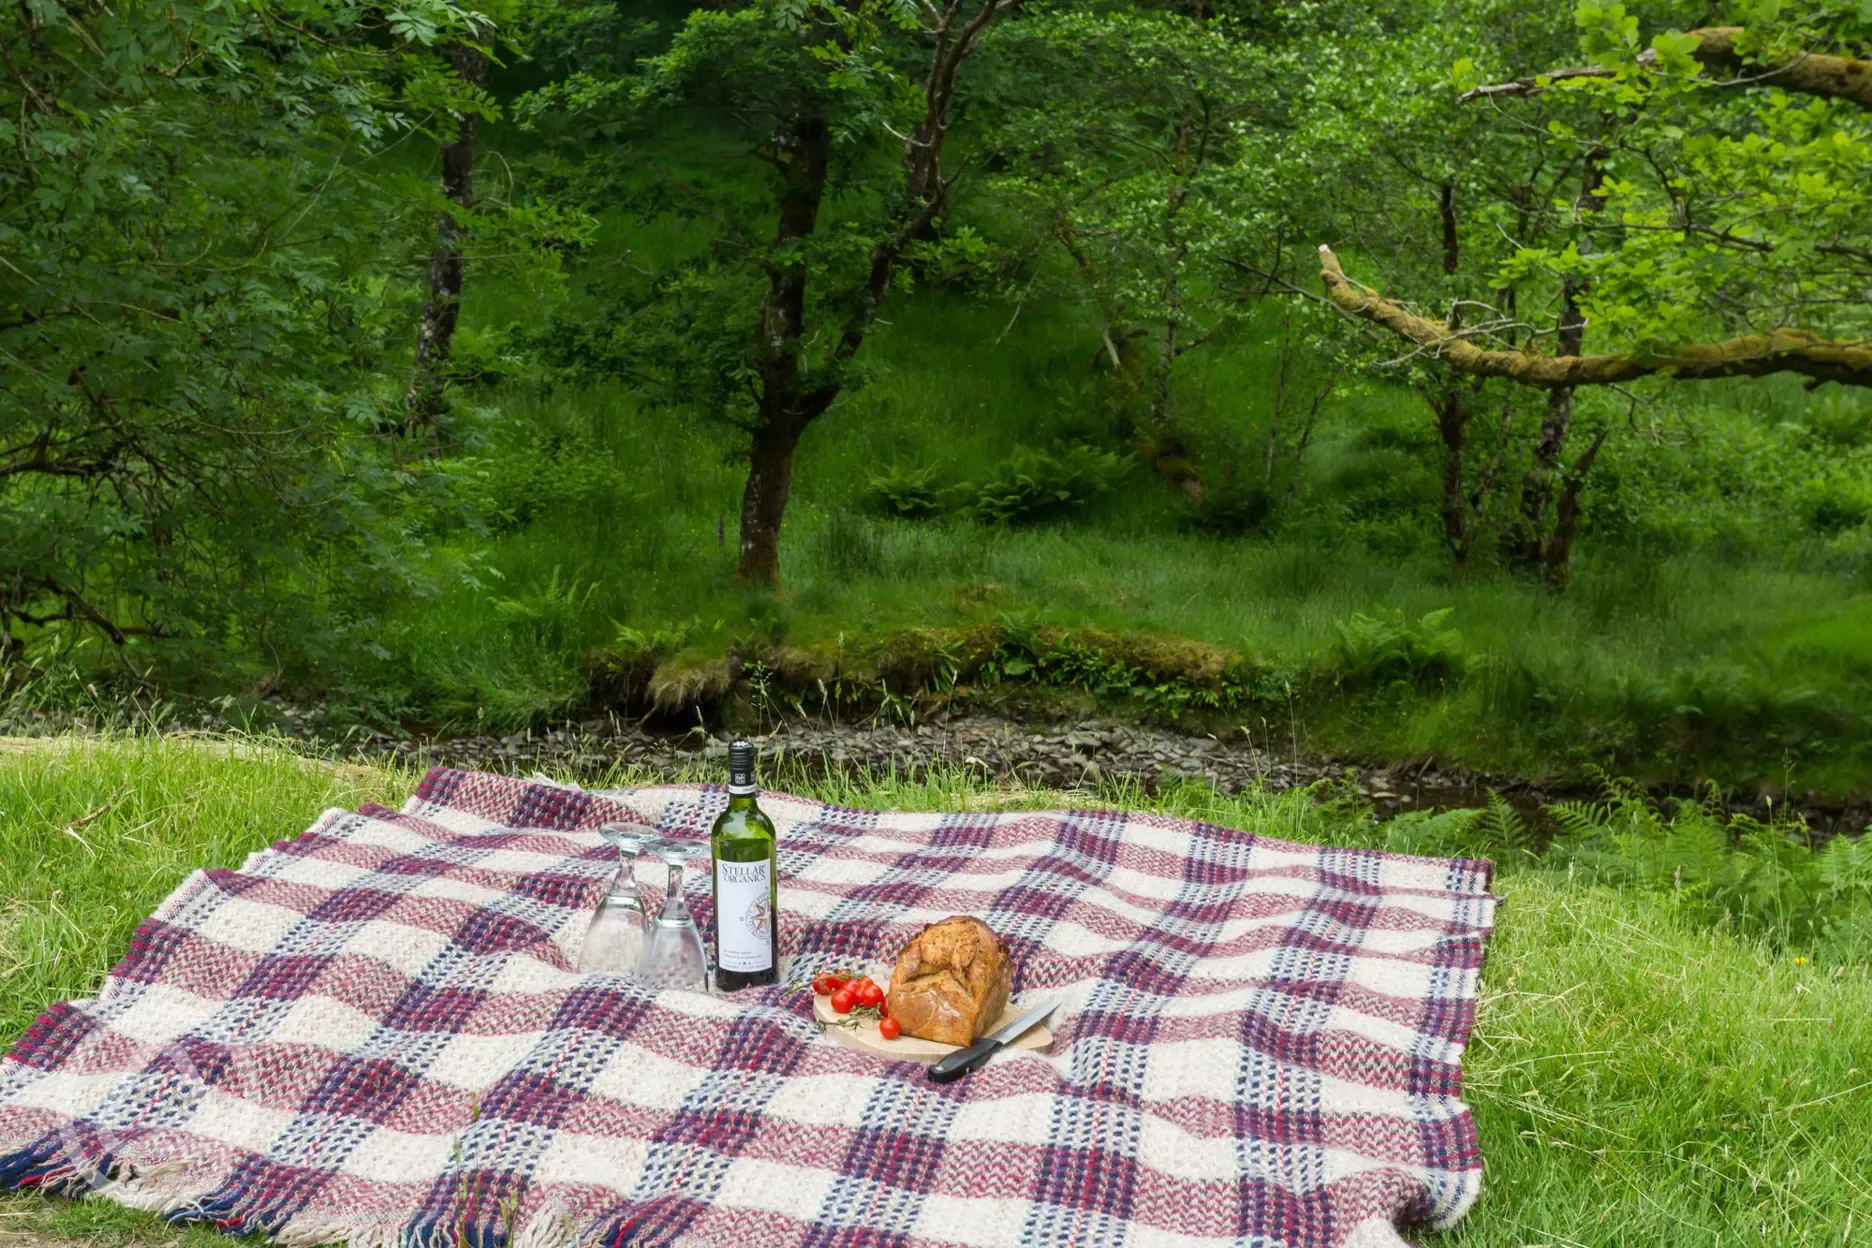 Picnic by the river yurt